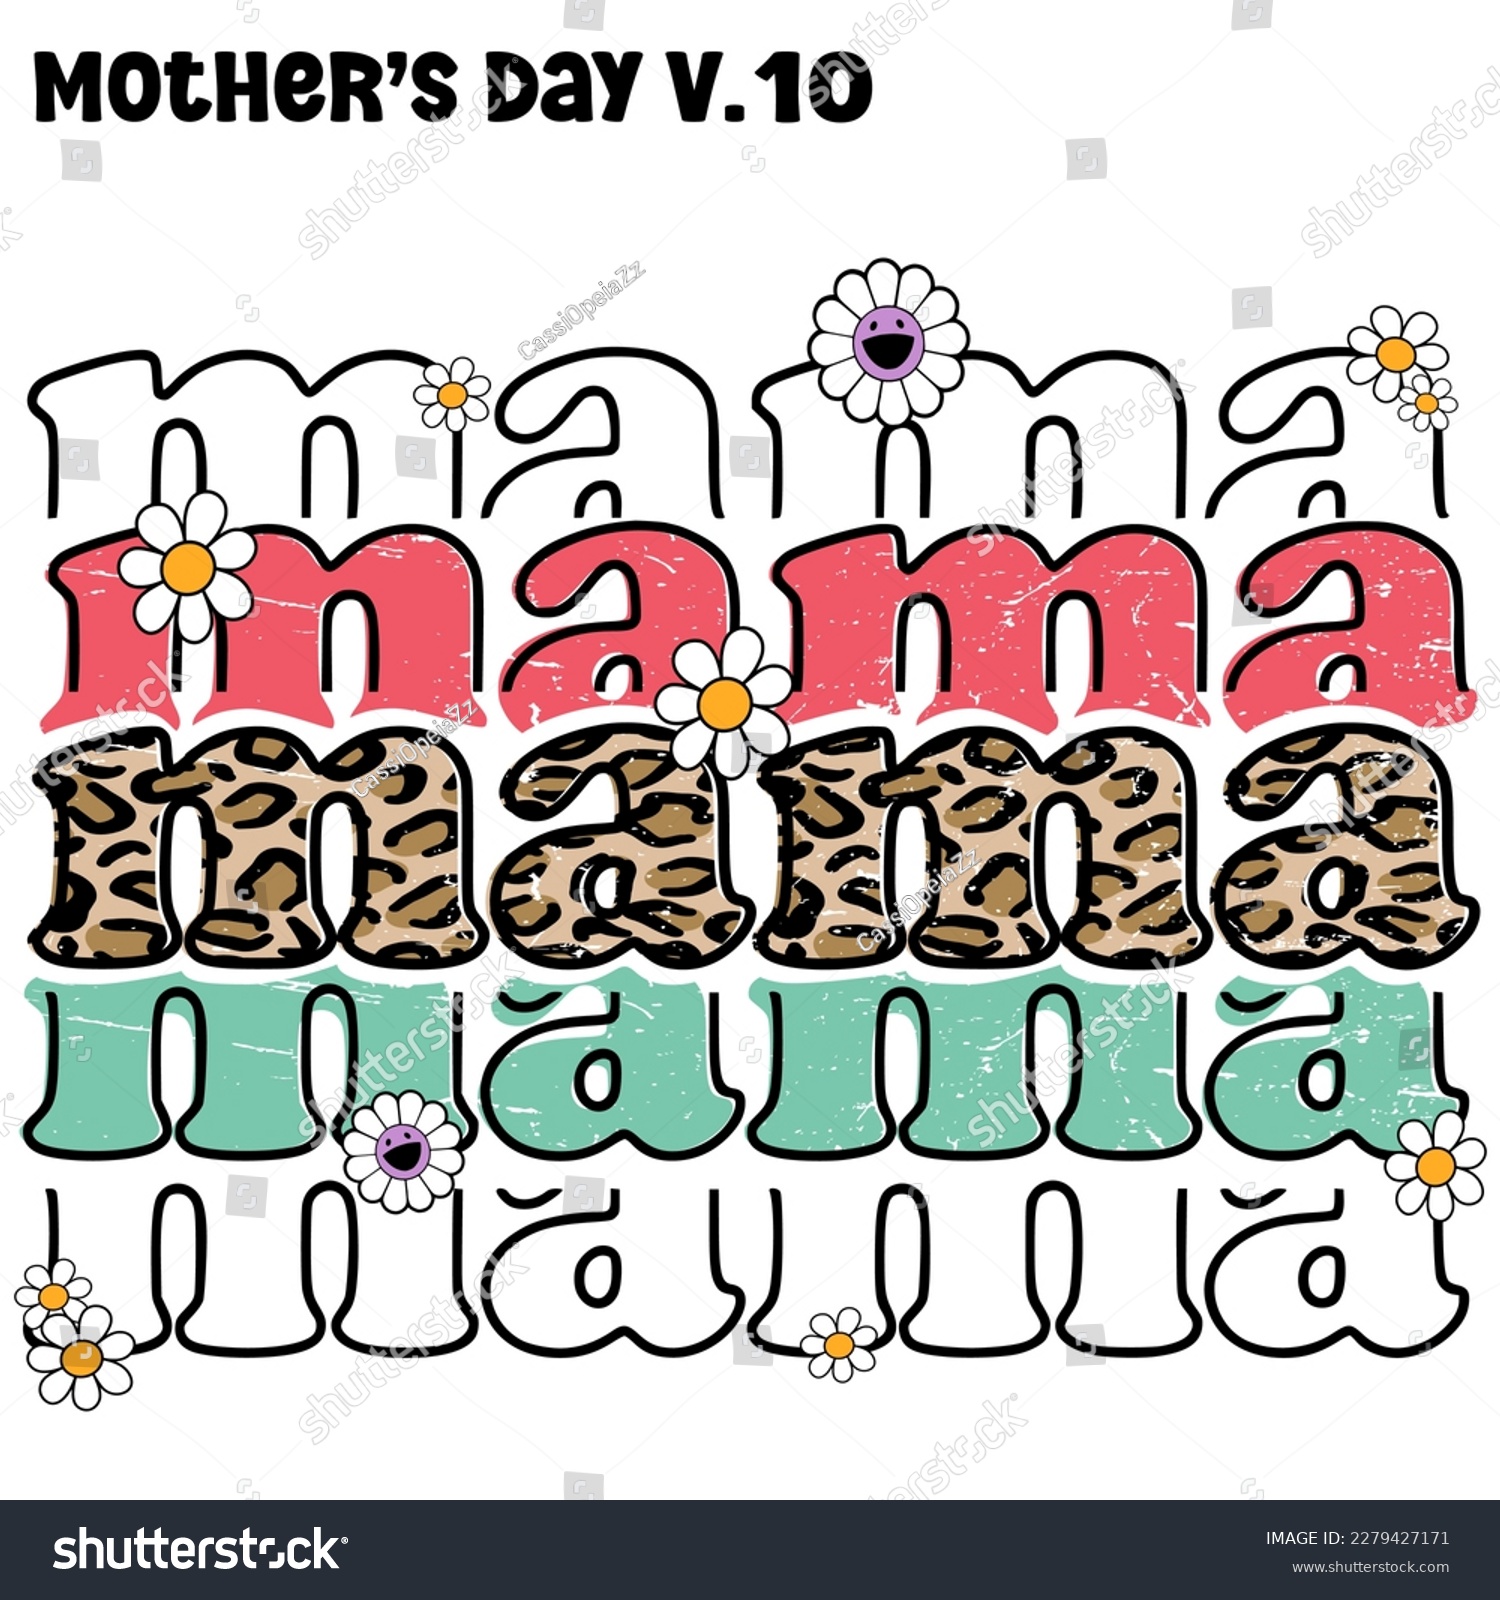 SVG of Mama Leopard lettering. Mother's Day V.10 , Mama Leopard lettering with flowers texture colorful 70's 80's 90's Retro style EPS. SVG. file design for t-shirt svg